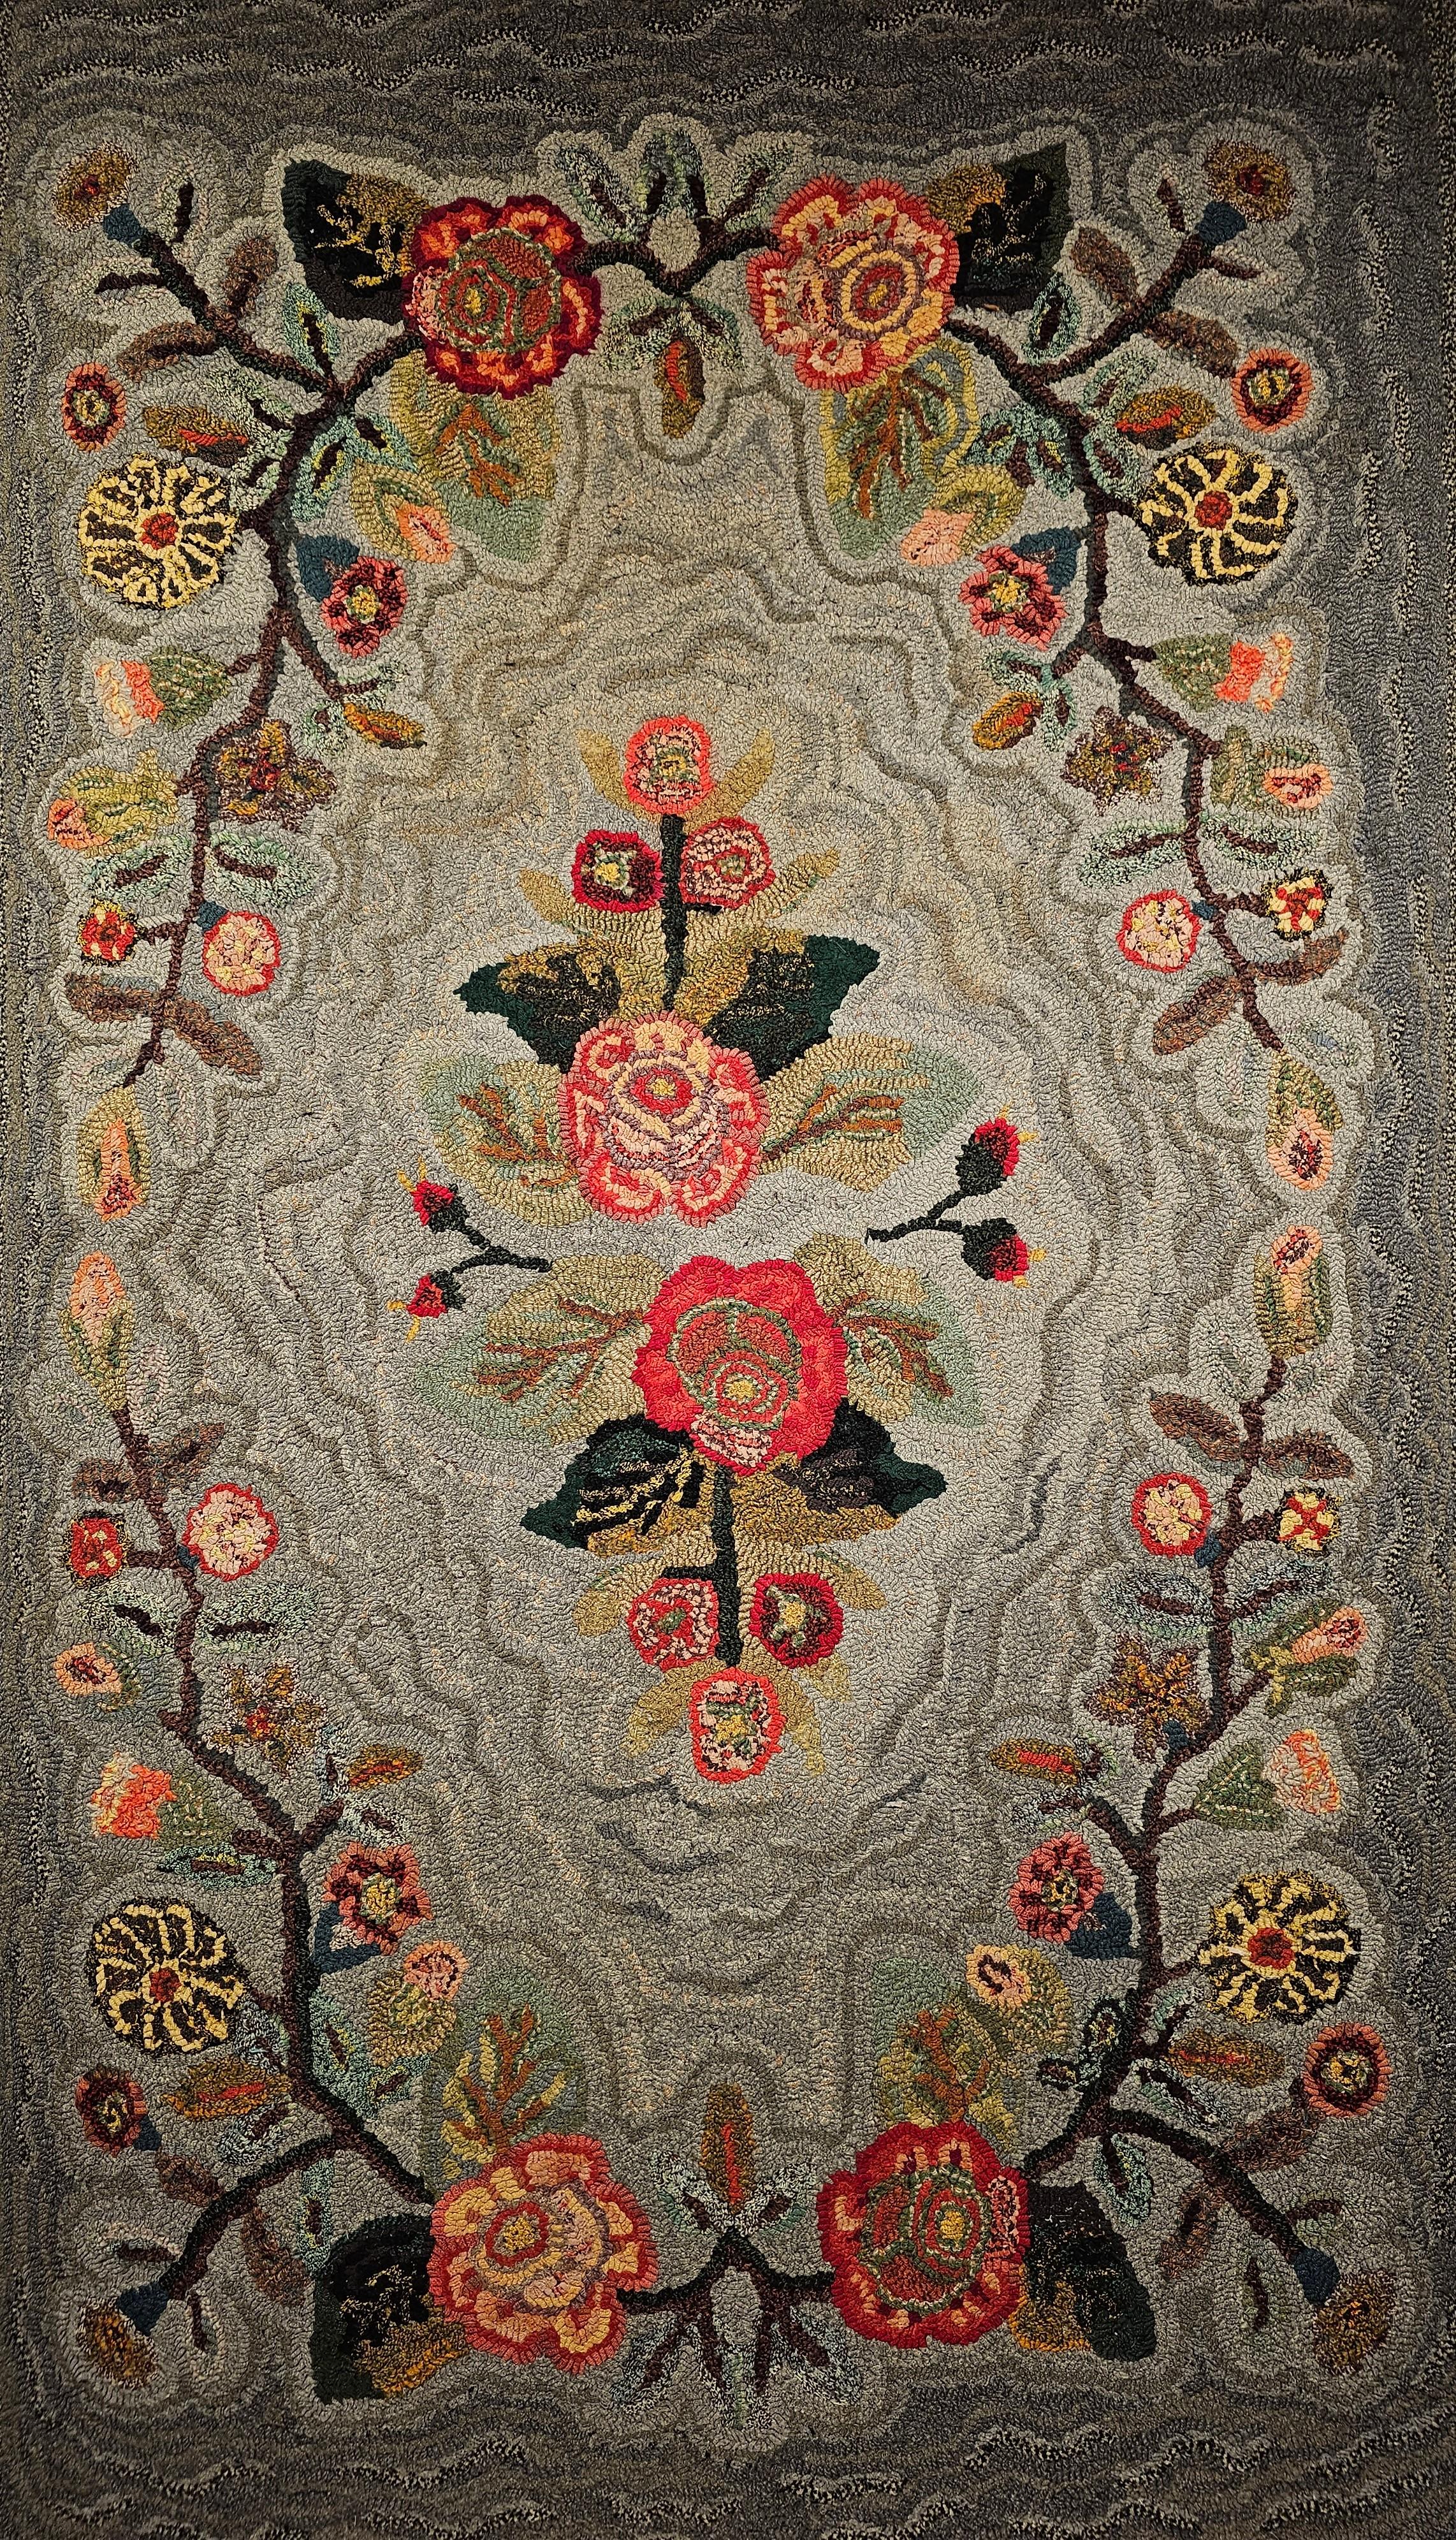 Vintage American Hand Hooked Rug from the mid 1900s in a floral pattern in pale blue and grey background with floral design in red, pink and green. The use of special design and the brilliant colors brings beauty to any space and design it is